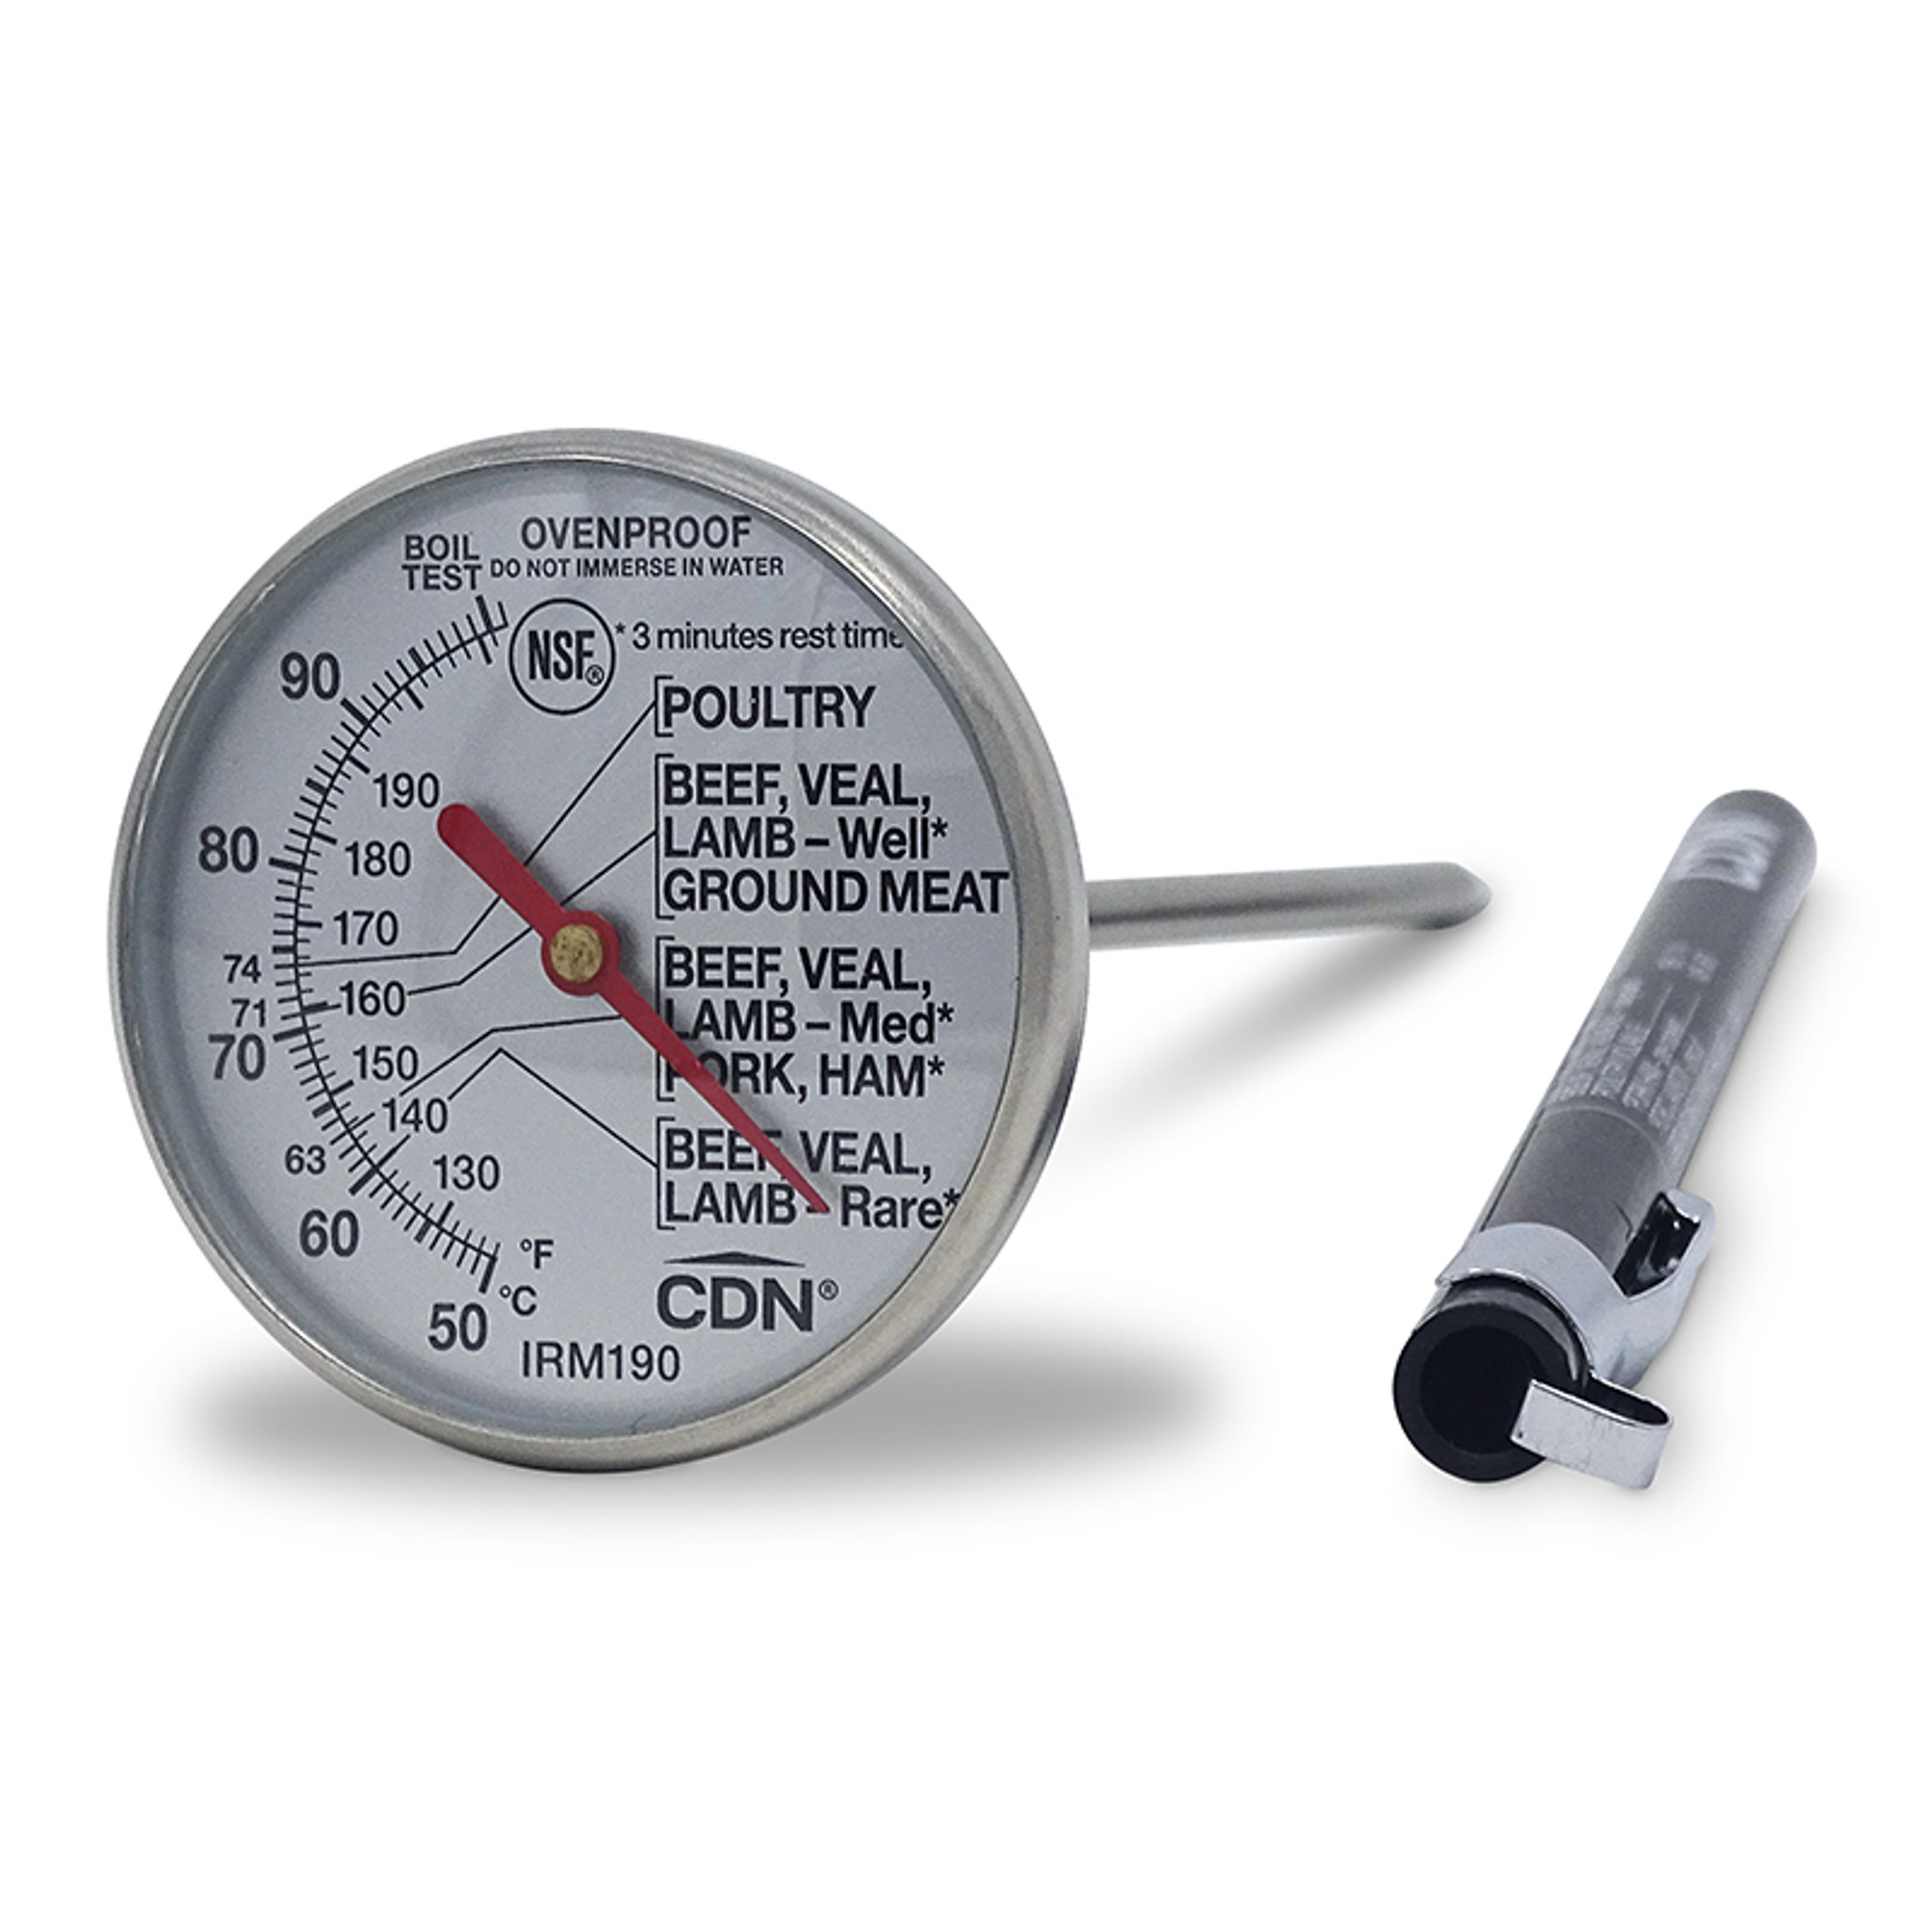 CDN ProAccurate Dial Oven Thermometer (2)